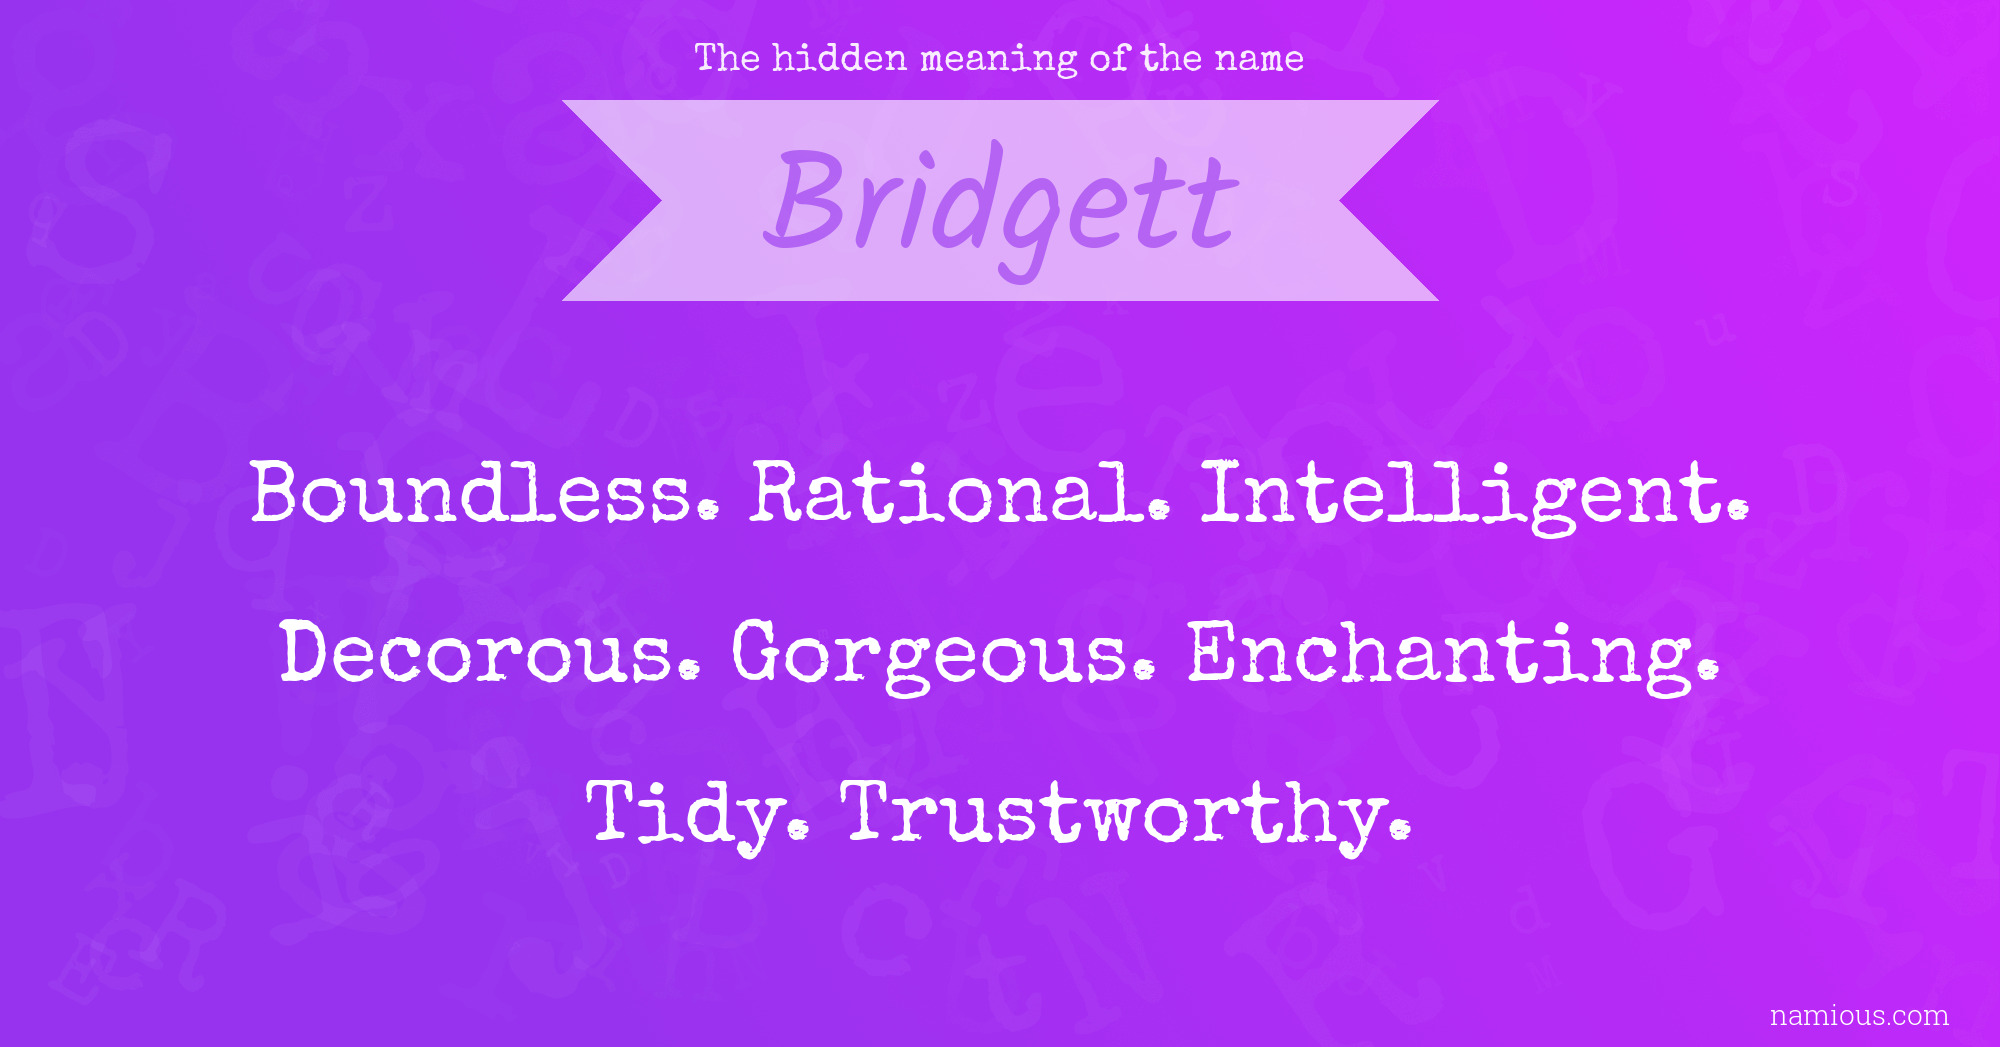 The hidden meaning of the name Bridgett